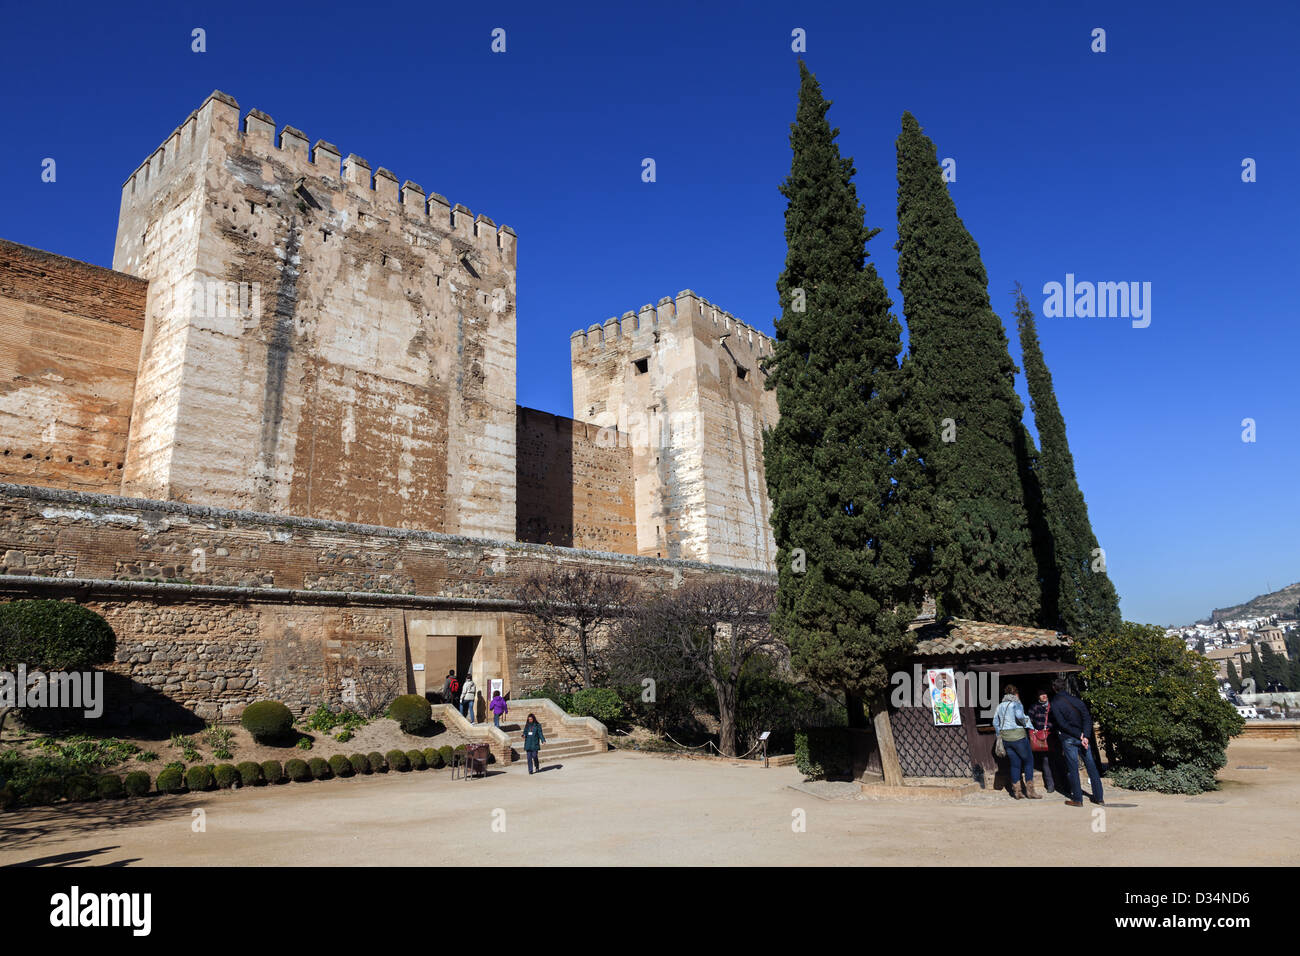 Entrance to the Alcazaba from the Plaza de los Aljibes (Square of the Cisterns) in the Alhambra Granada Spain Stock Photo